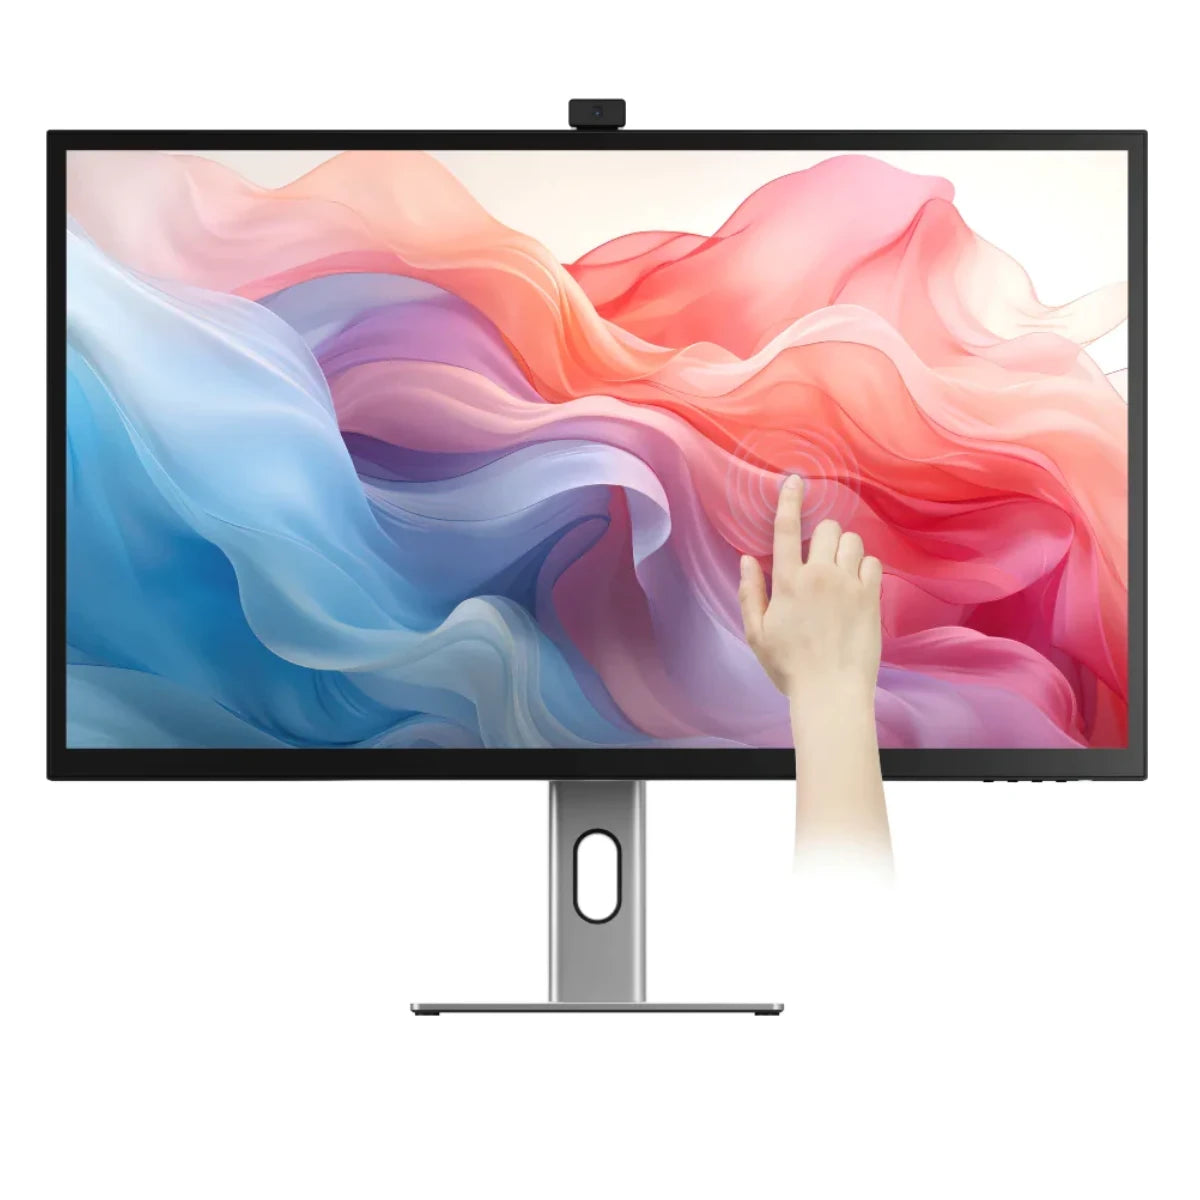 Clarity Max Touch 32" UHD 4K Monitor with USB-C Power Delivery, Webcam and Touch Screen